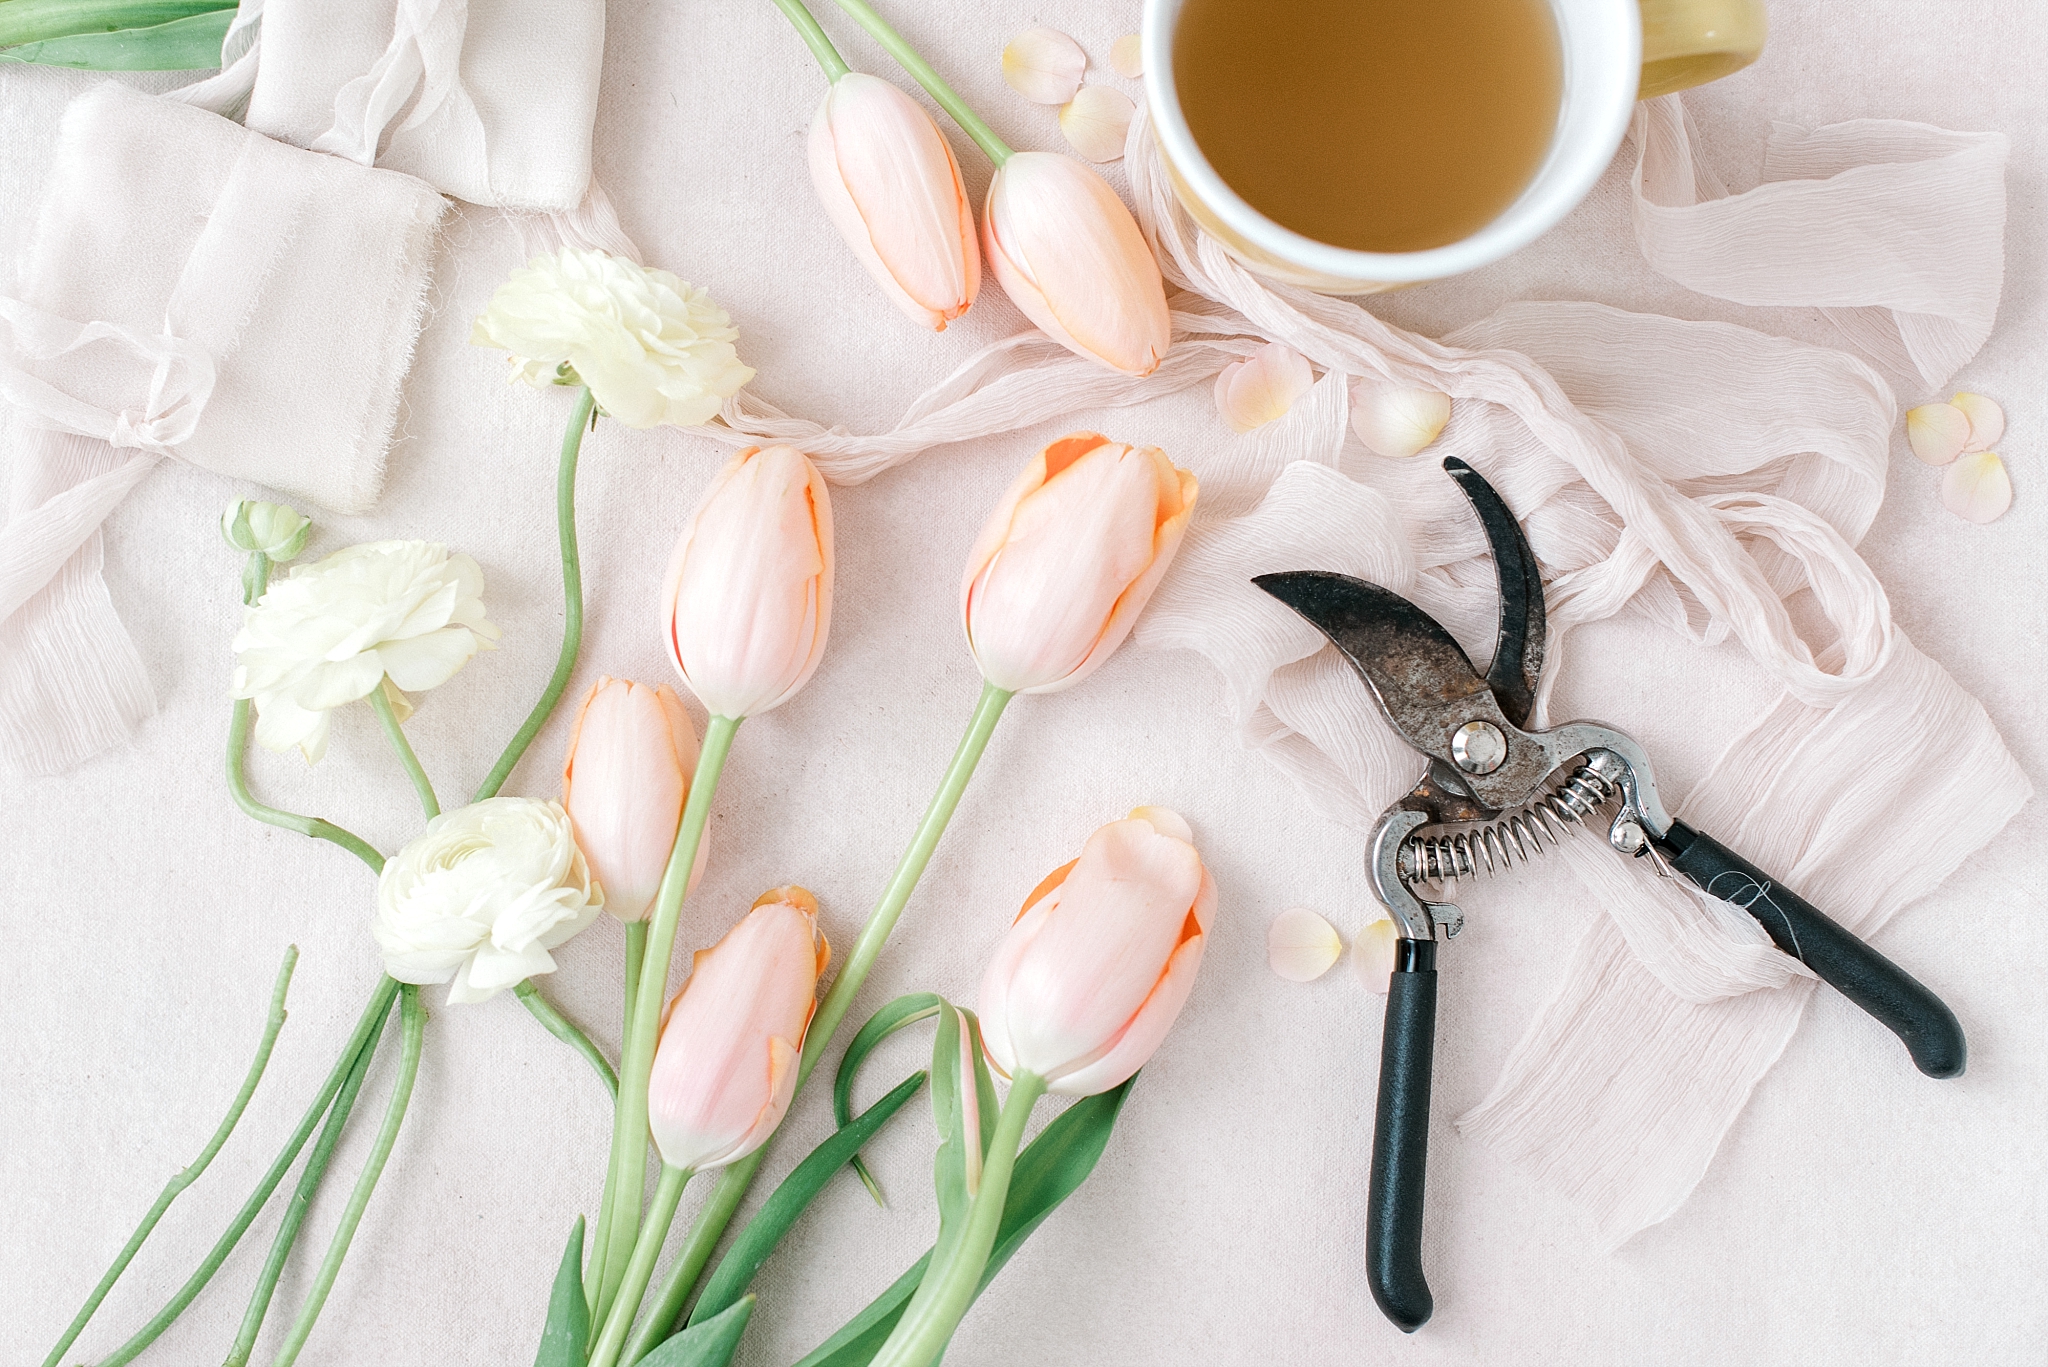 Pink and white tulips and cutting shears